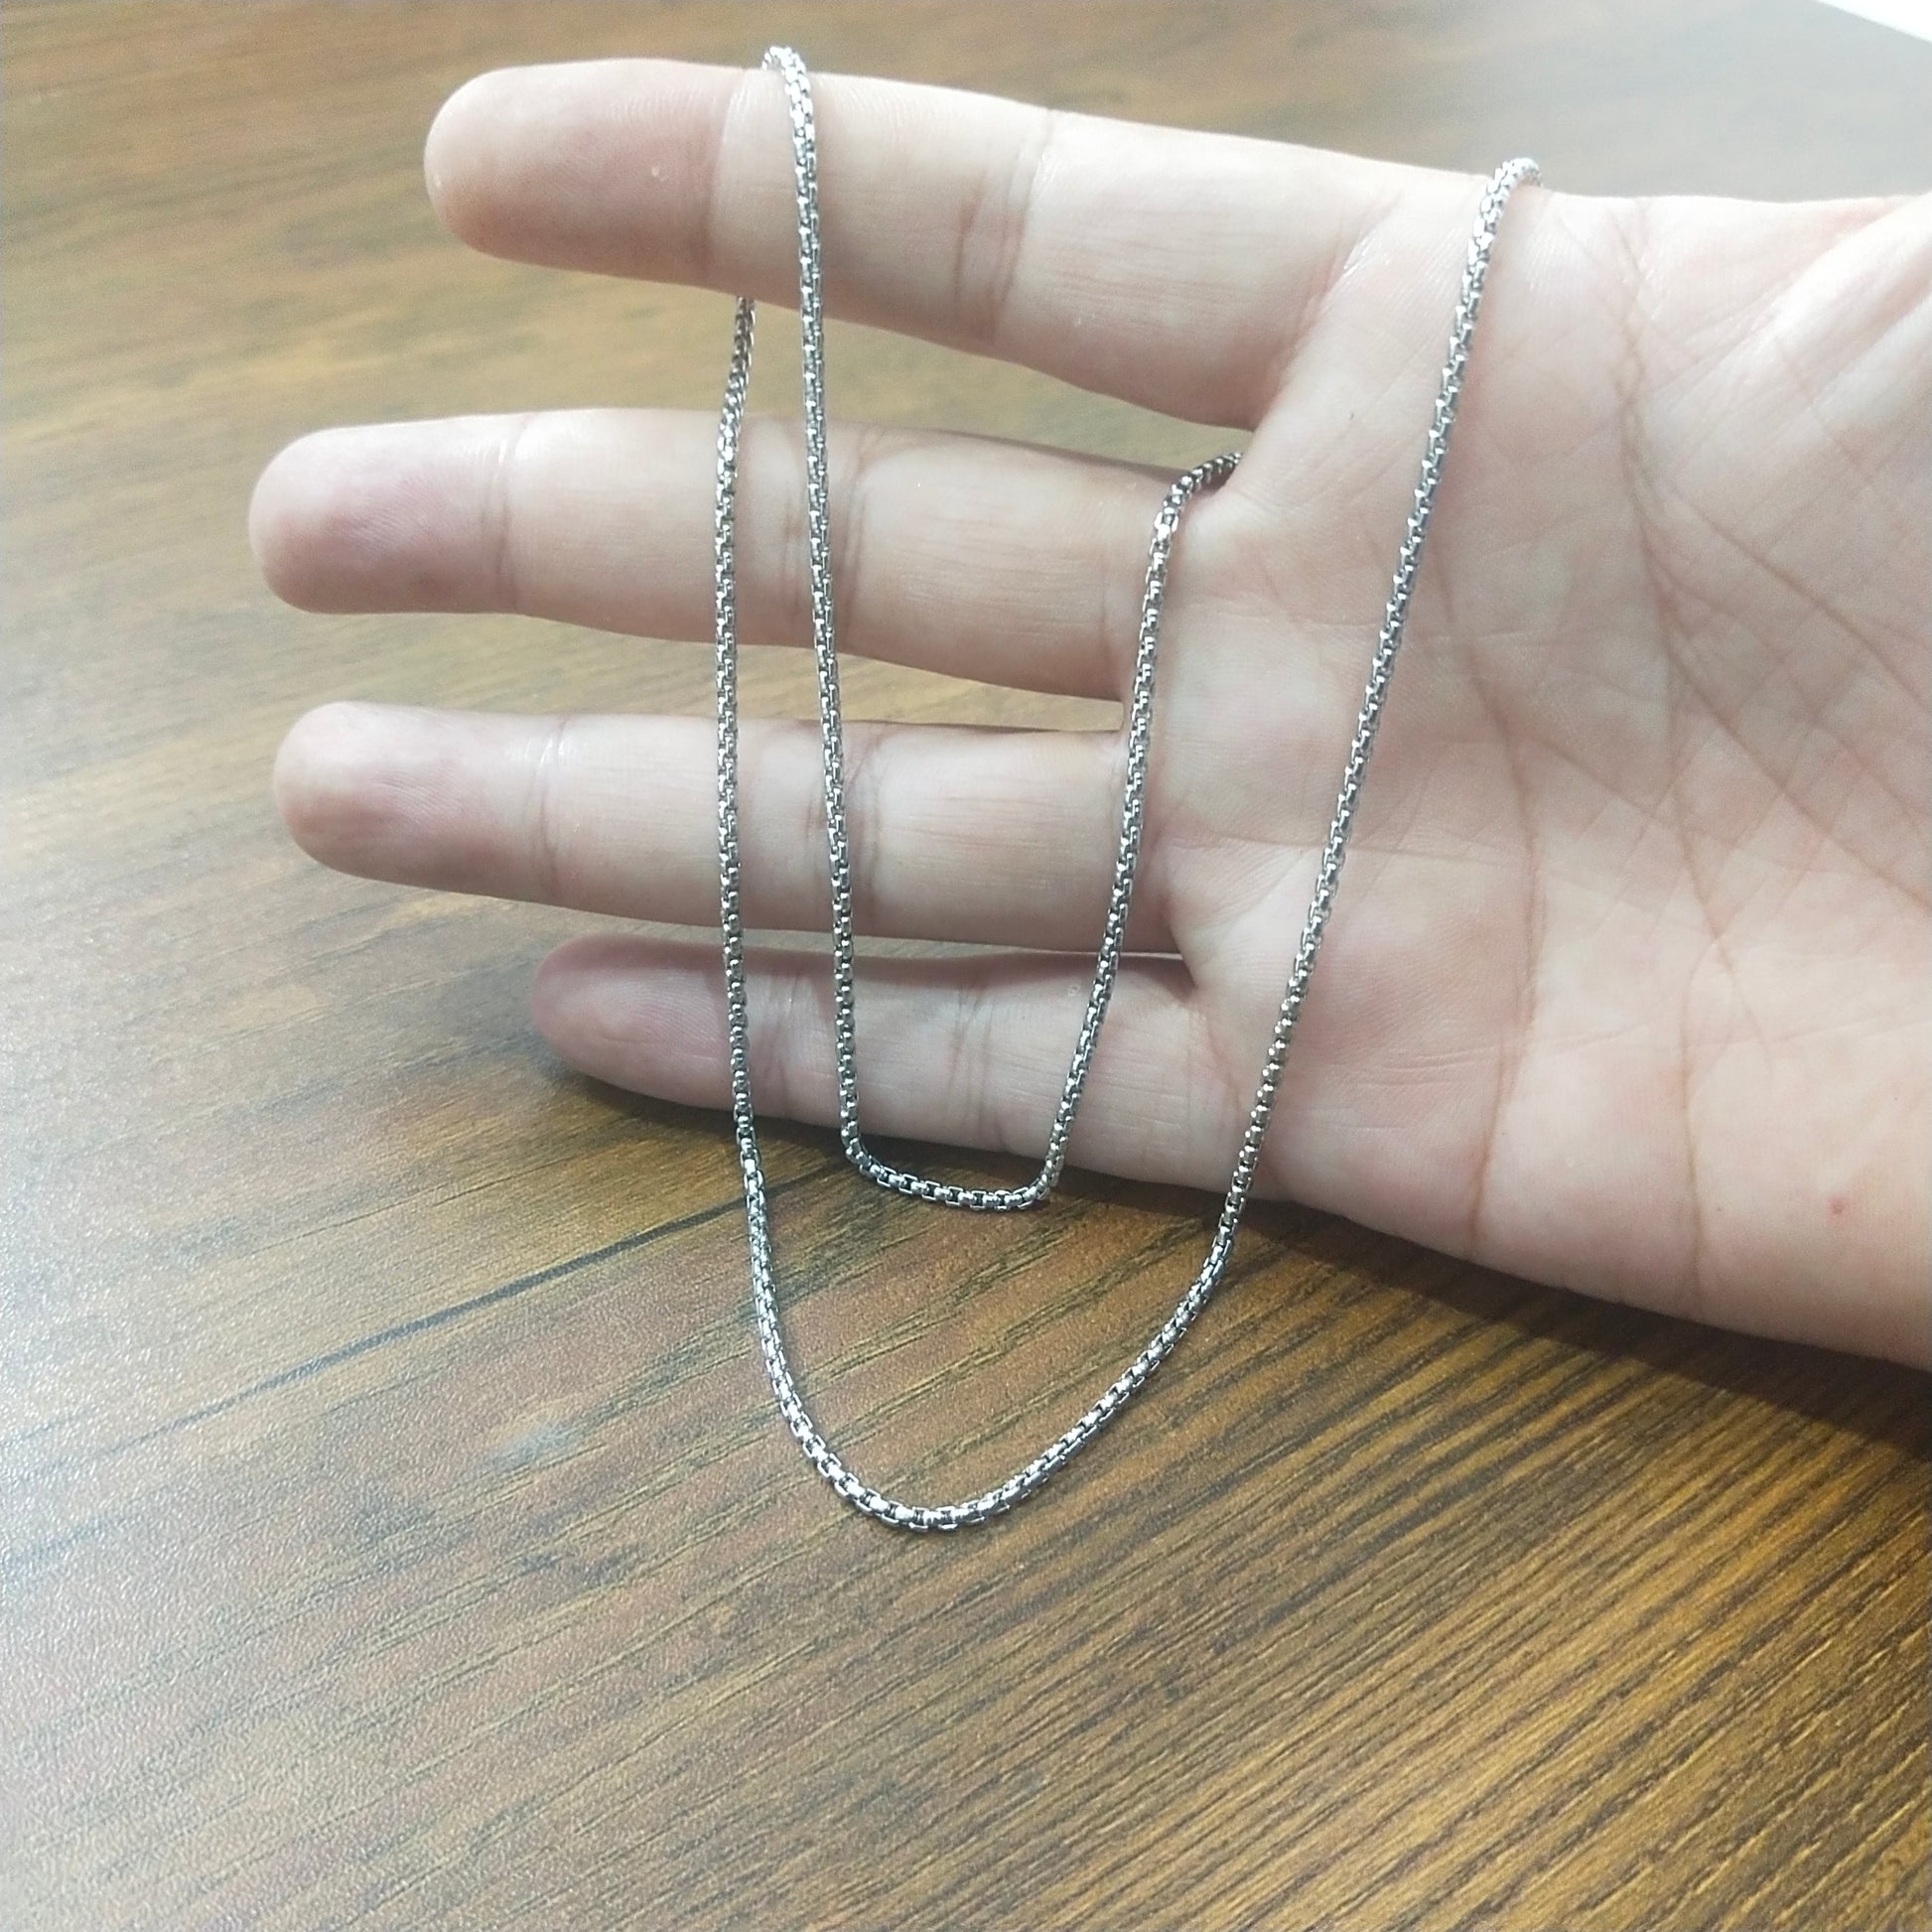 2mm thin Silver round box chain necklace for men online in Pakistan